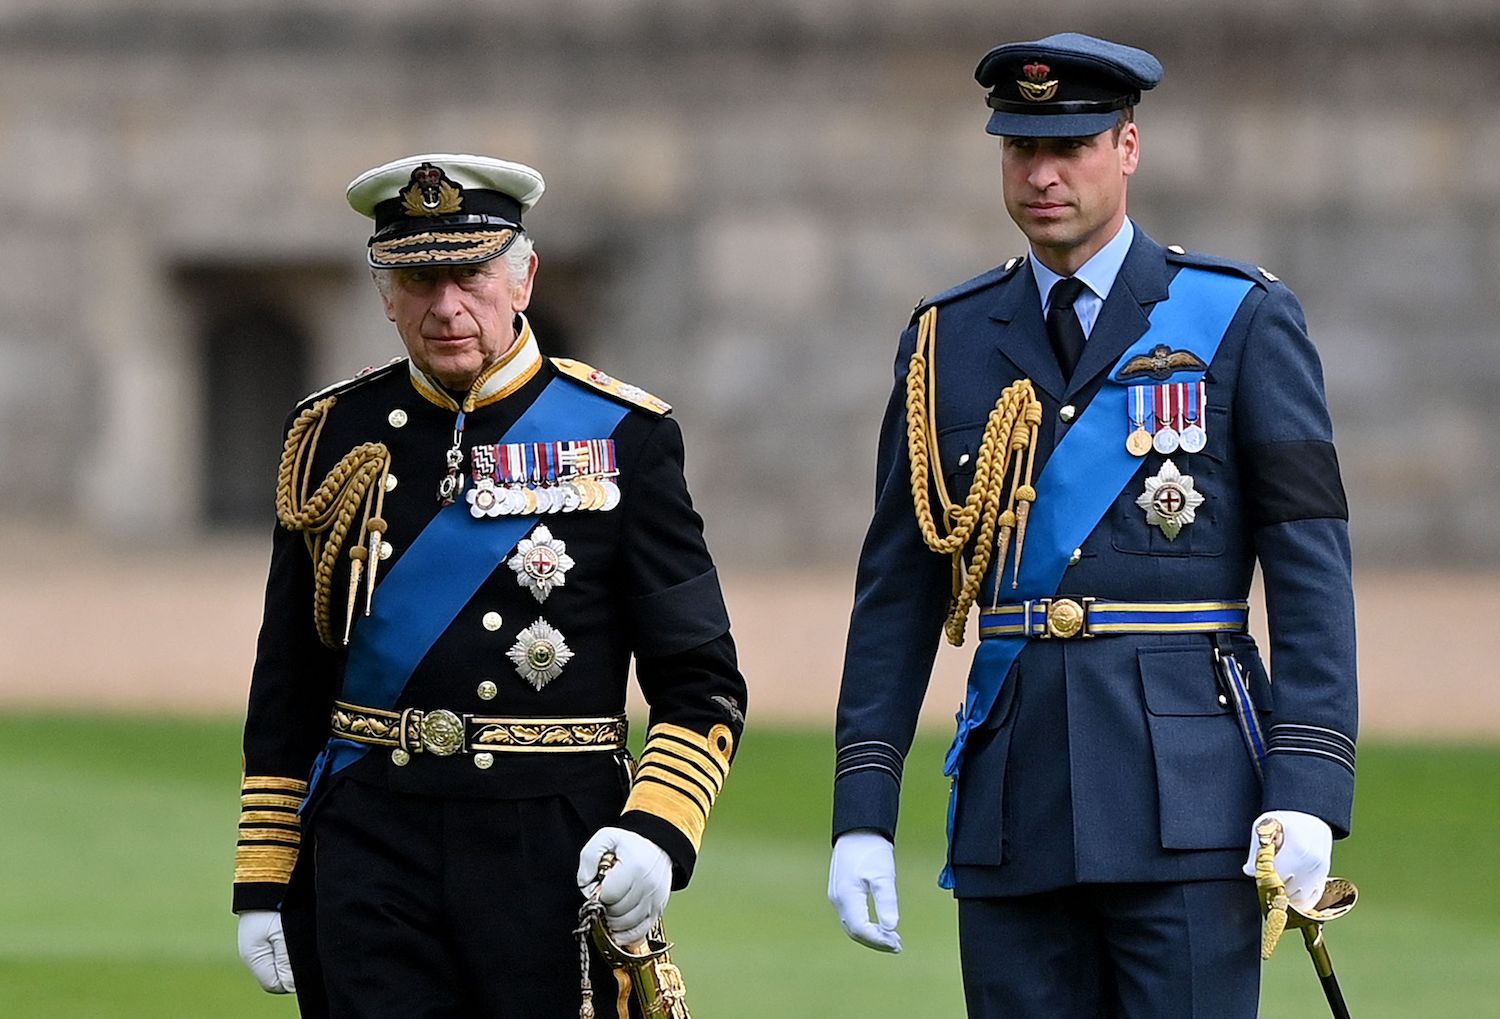 King Charles and Prince William stand together in uniform at the committal service for Queen Elizabeth